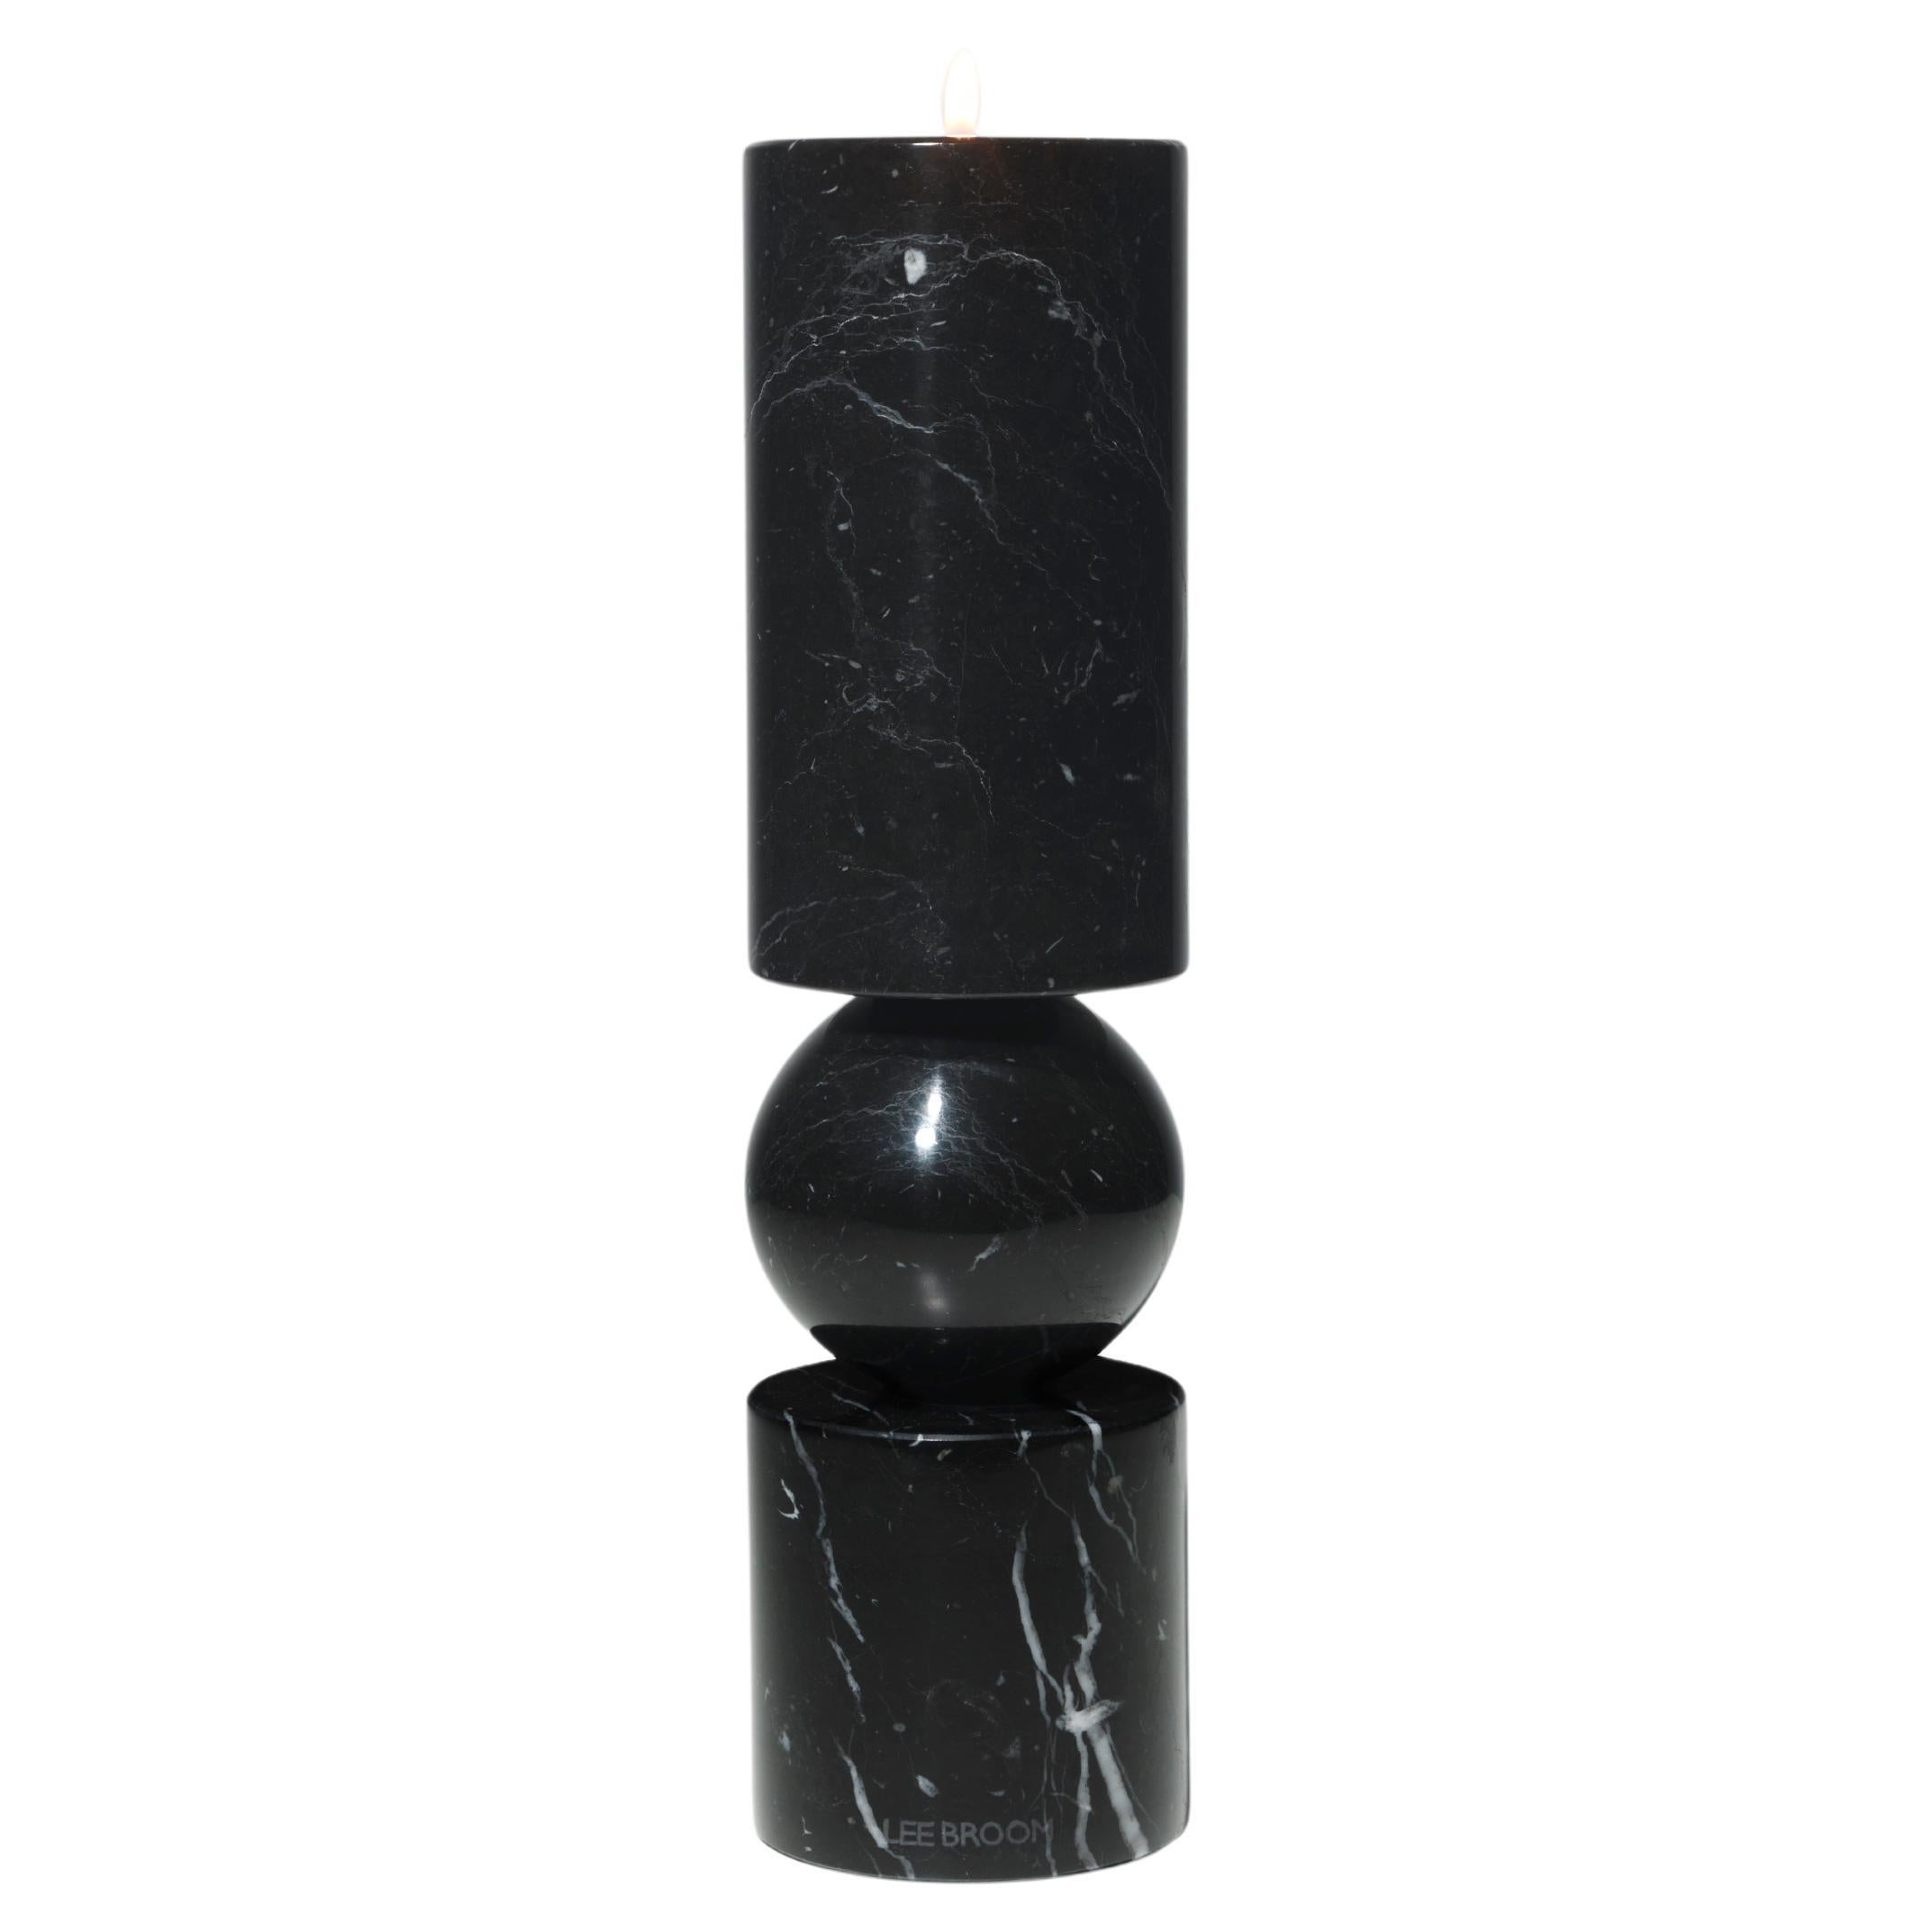 Lee Broom - Fulcrum Candlestick Black Marble - Small For Sale